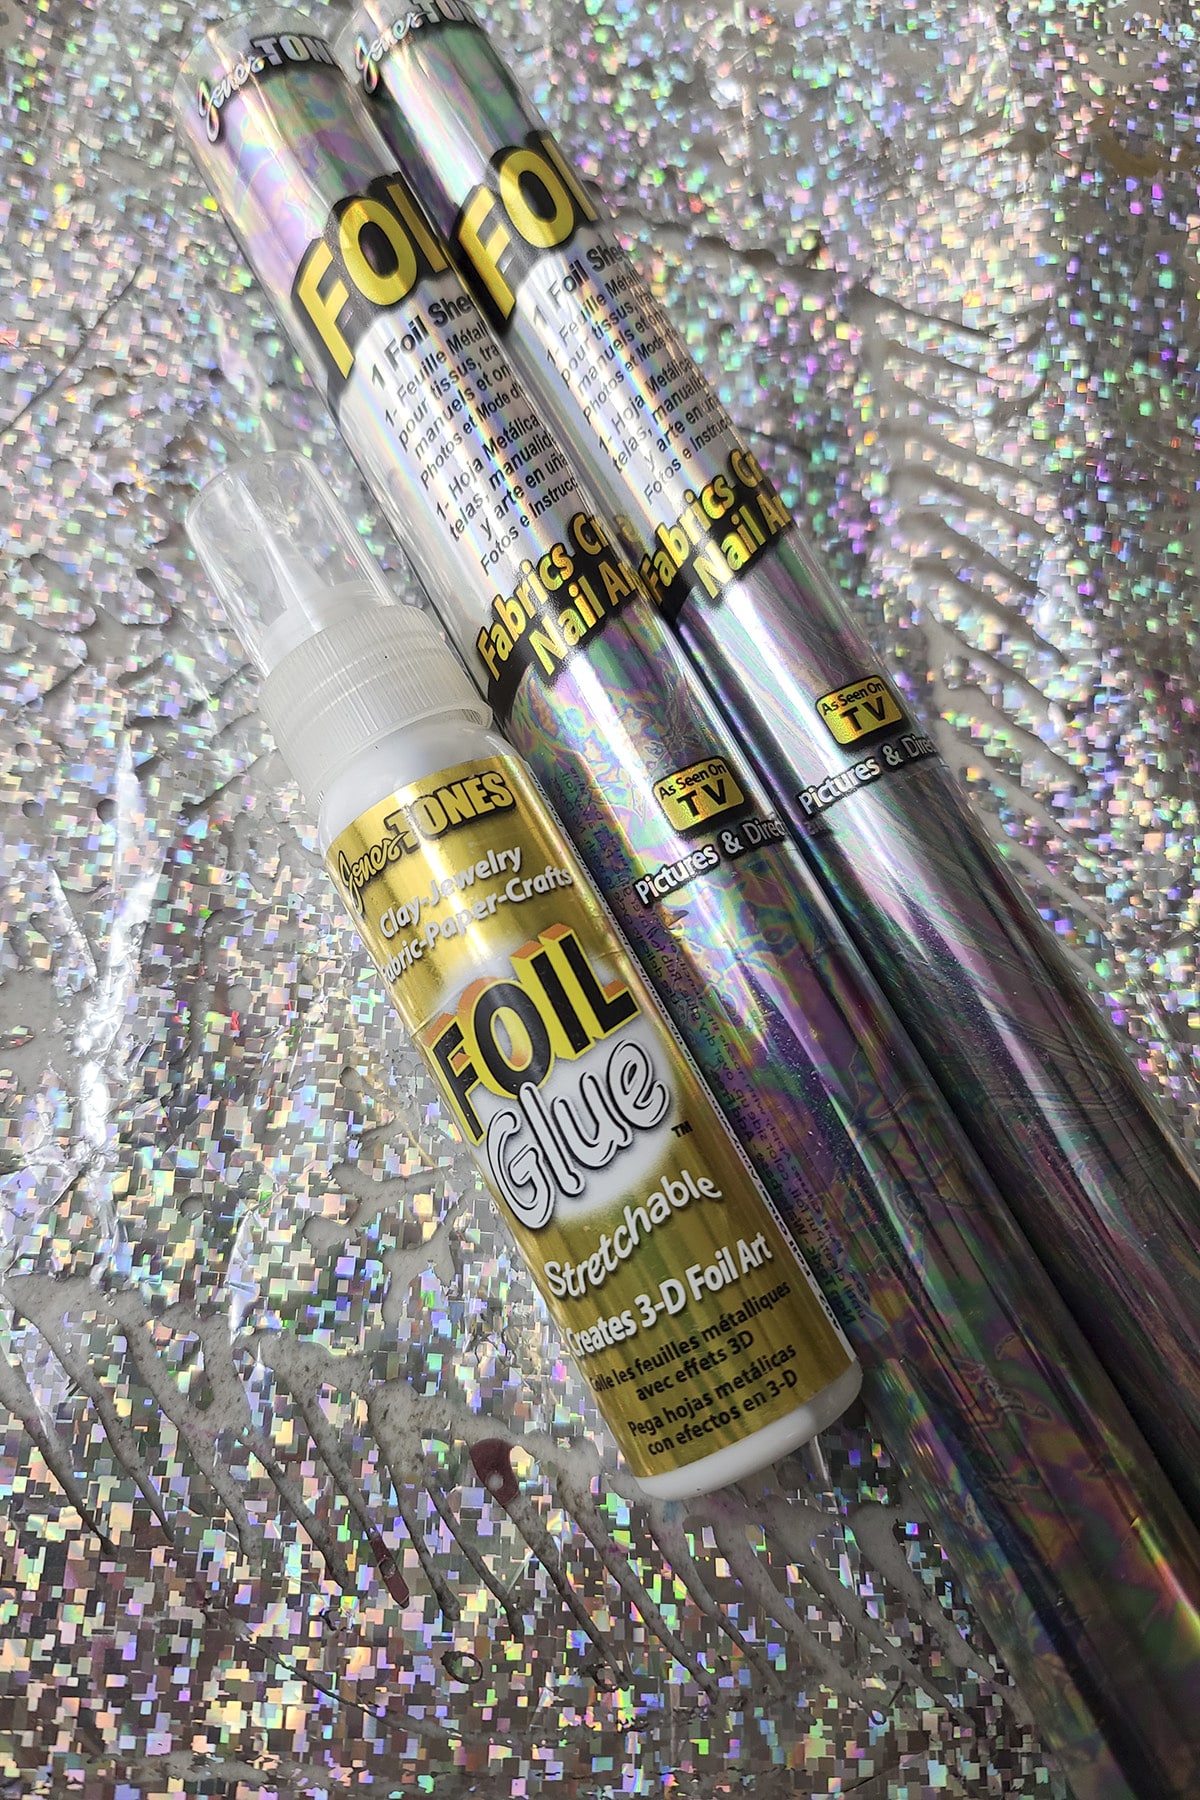 Two rolls of holographic foil paper and a bottle of foil glue, resting on a sheet of holographic foil.